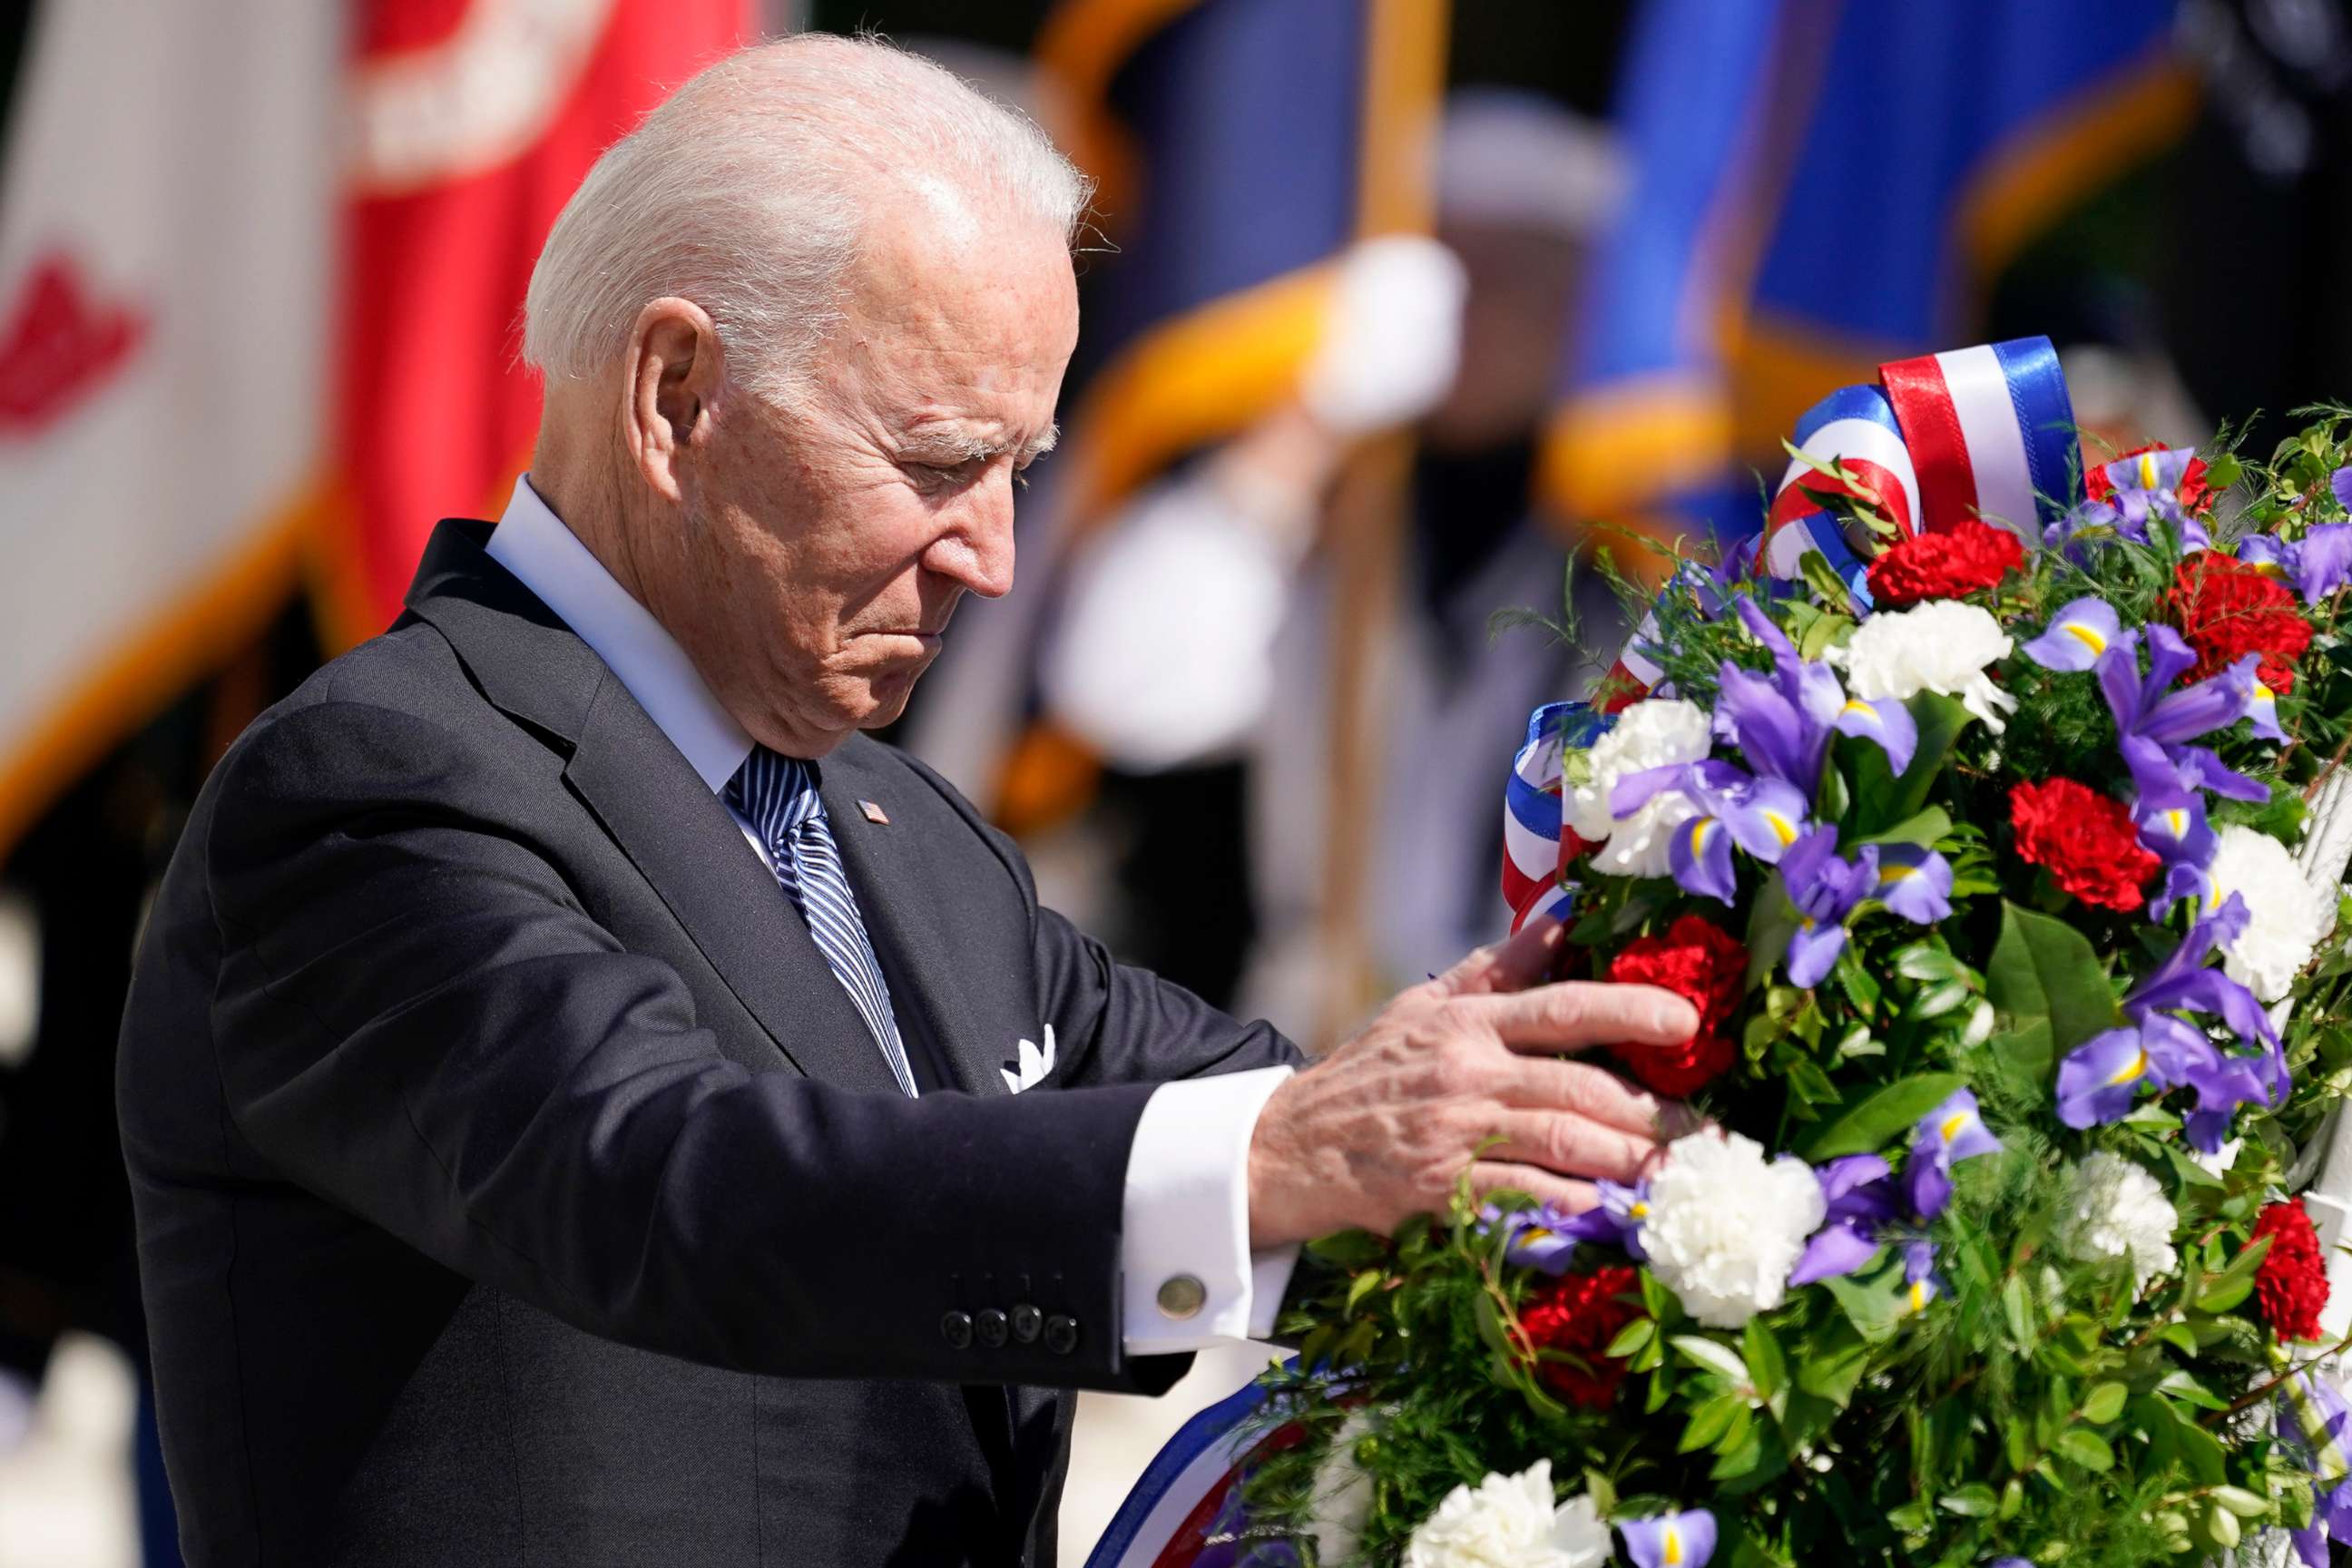 PHOTO: President Joe Biden touches a the wreath at the Tomb of the Unknown Soldier at Arlington National Cemetery on Memorial Day, Monday, May 31, 2021, in Arlington, Va.